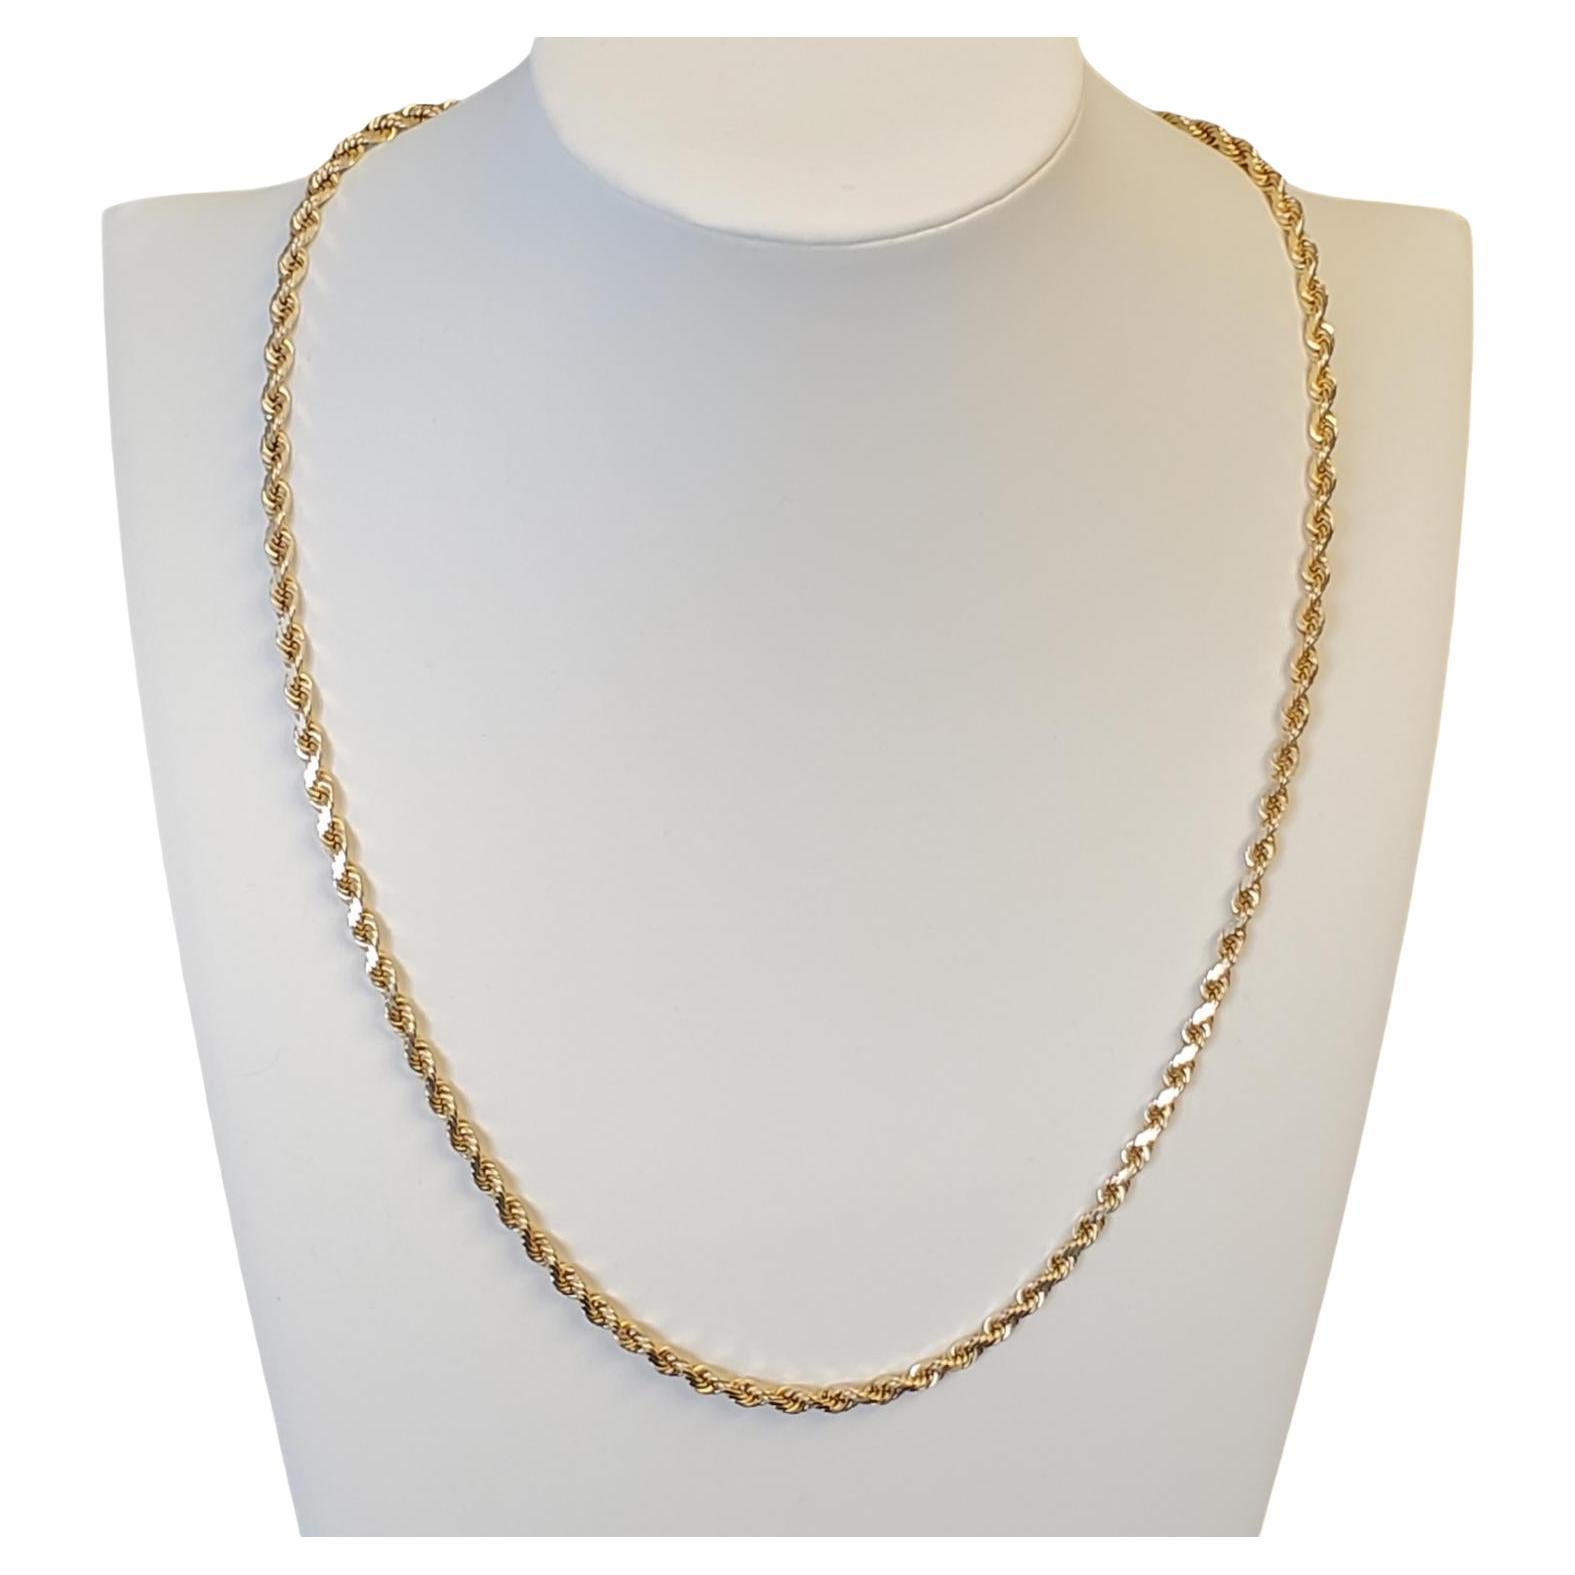 10K Yellow Gold Heavy Diamond Cut Rope Chain Necklace Very Well Made 22" For Sale